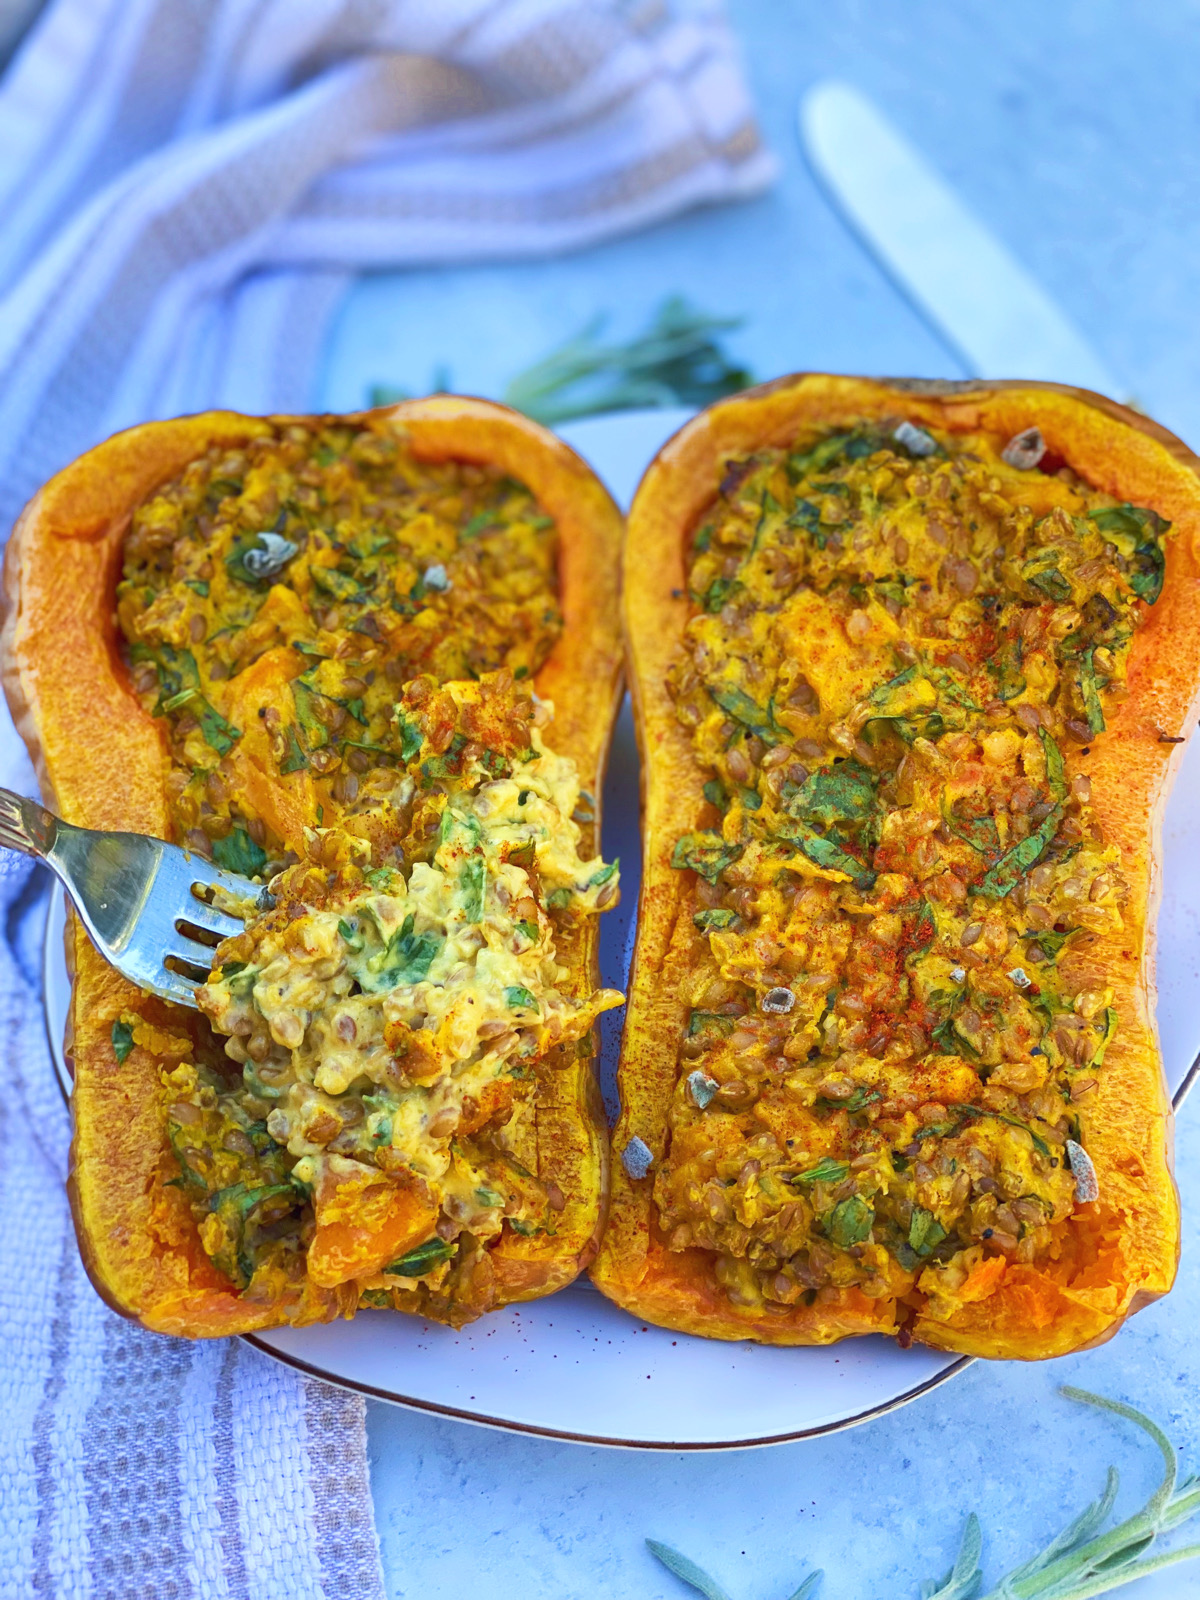 Farro Mac n’ Cheese Stuffed Butternut Squash pleases meat and plant eaters alike with a decadent, hearty flavor palate. 